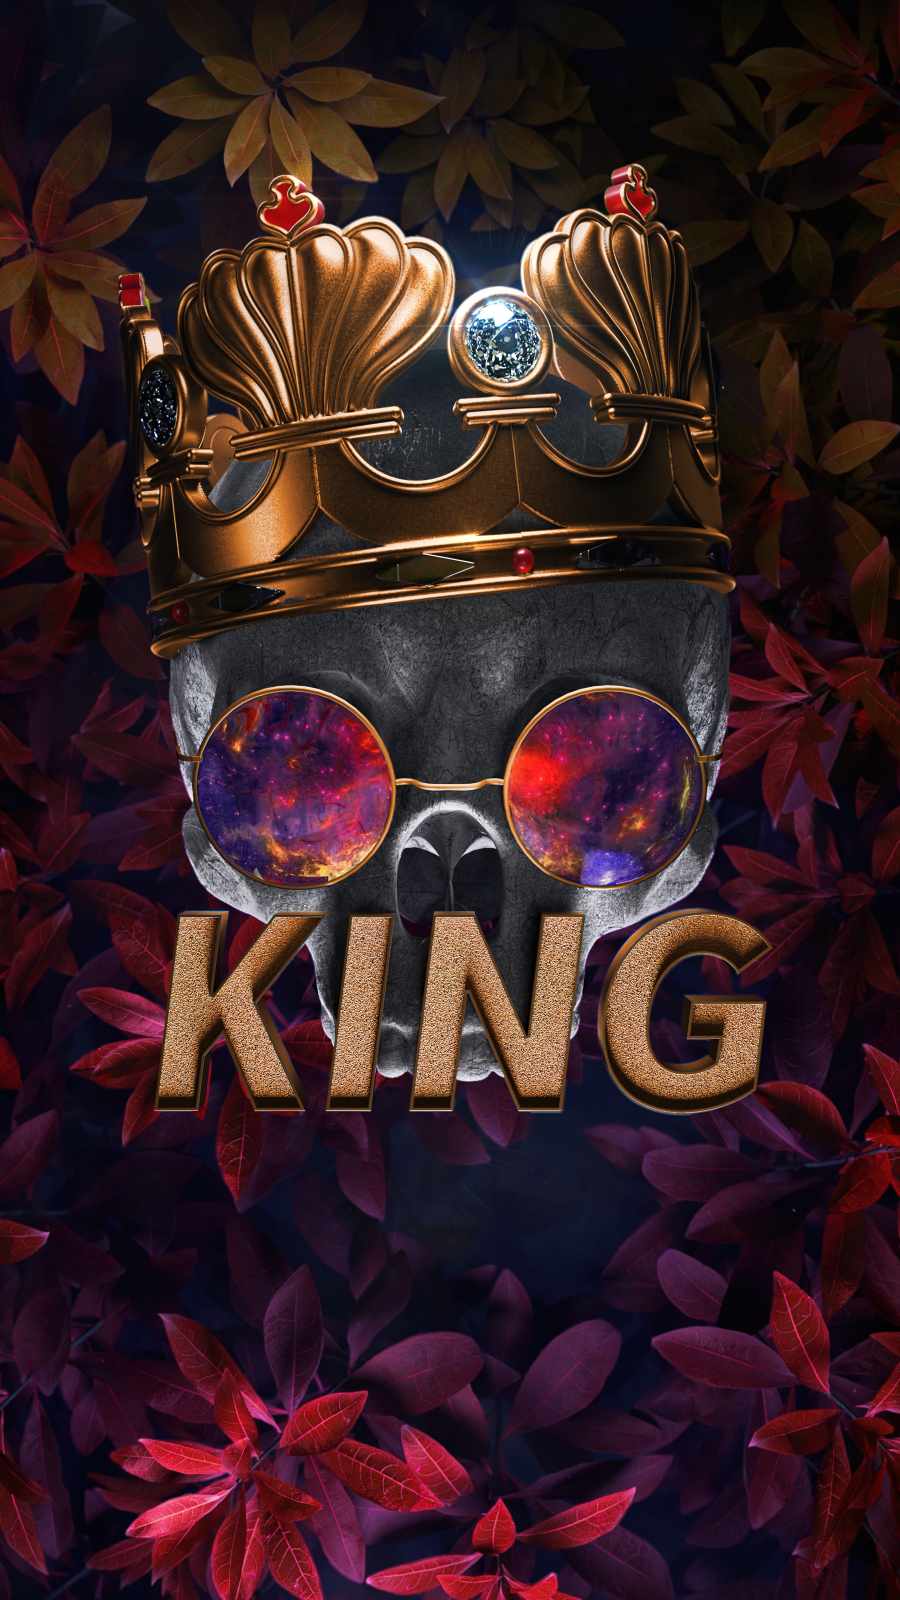 Download king wallpaper by raviman85  40  Free on ZEDGE now Browse  millions of popular king Wa  Lion king art Art wallpaper iphone  Graffiti wallpaper iphone